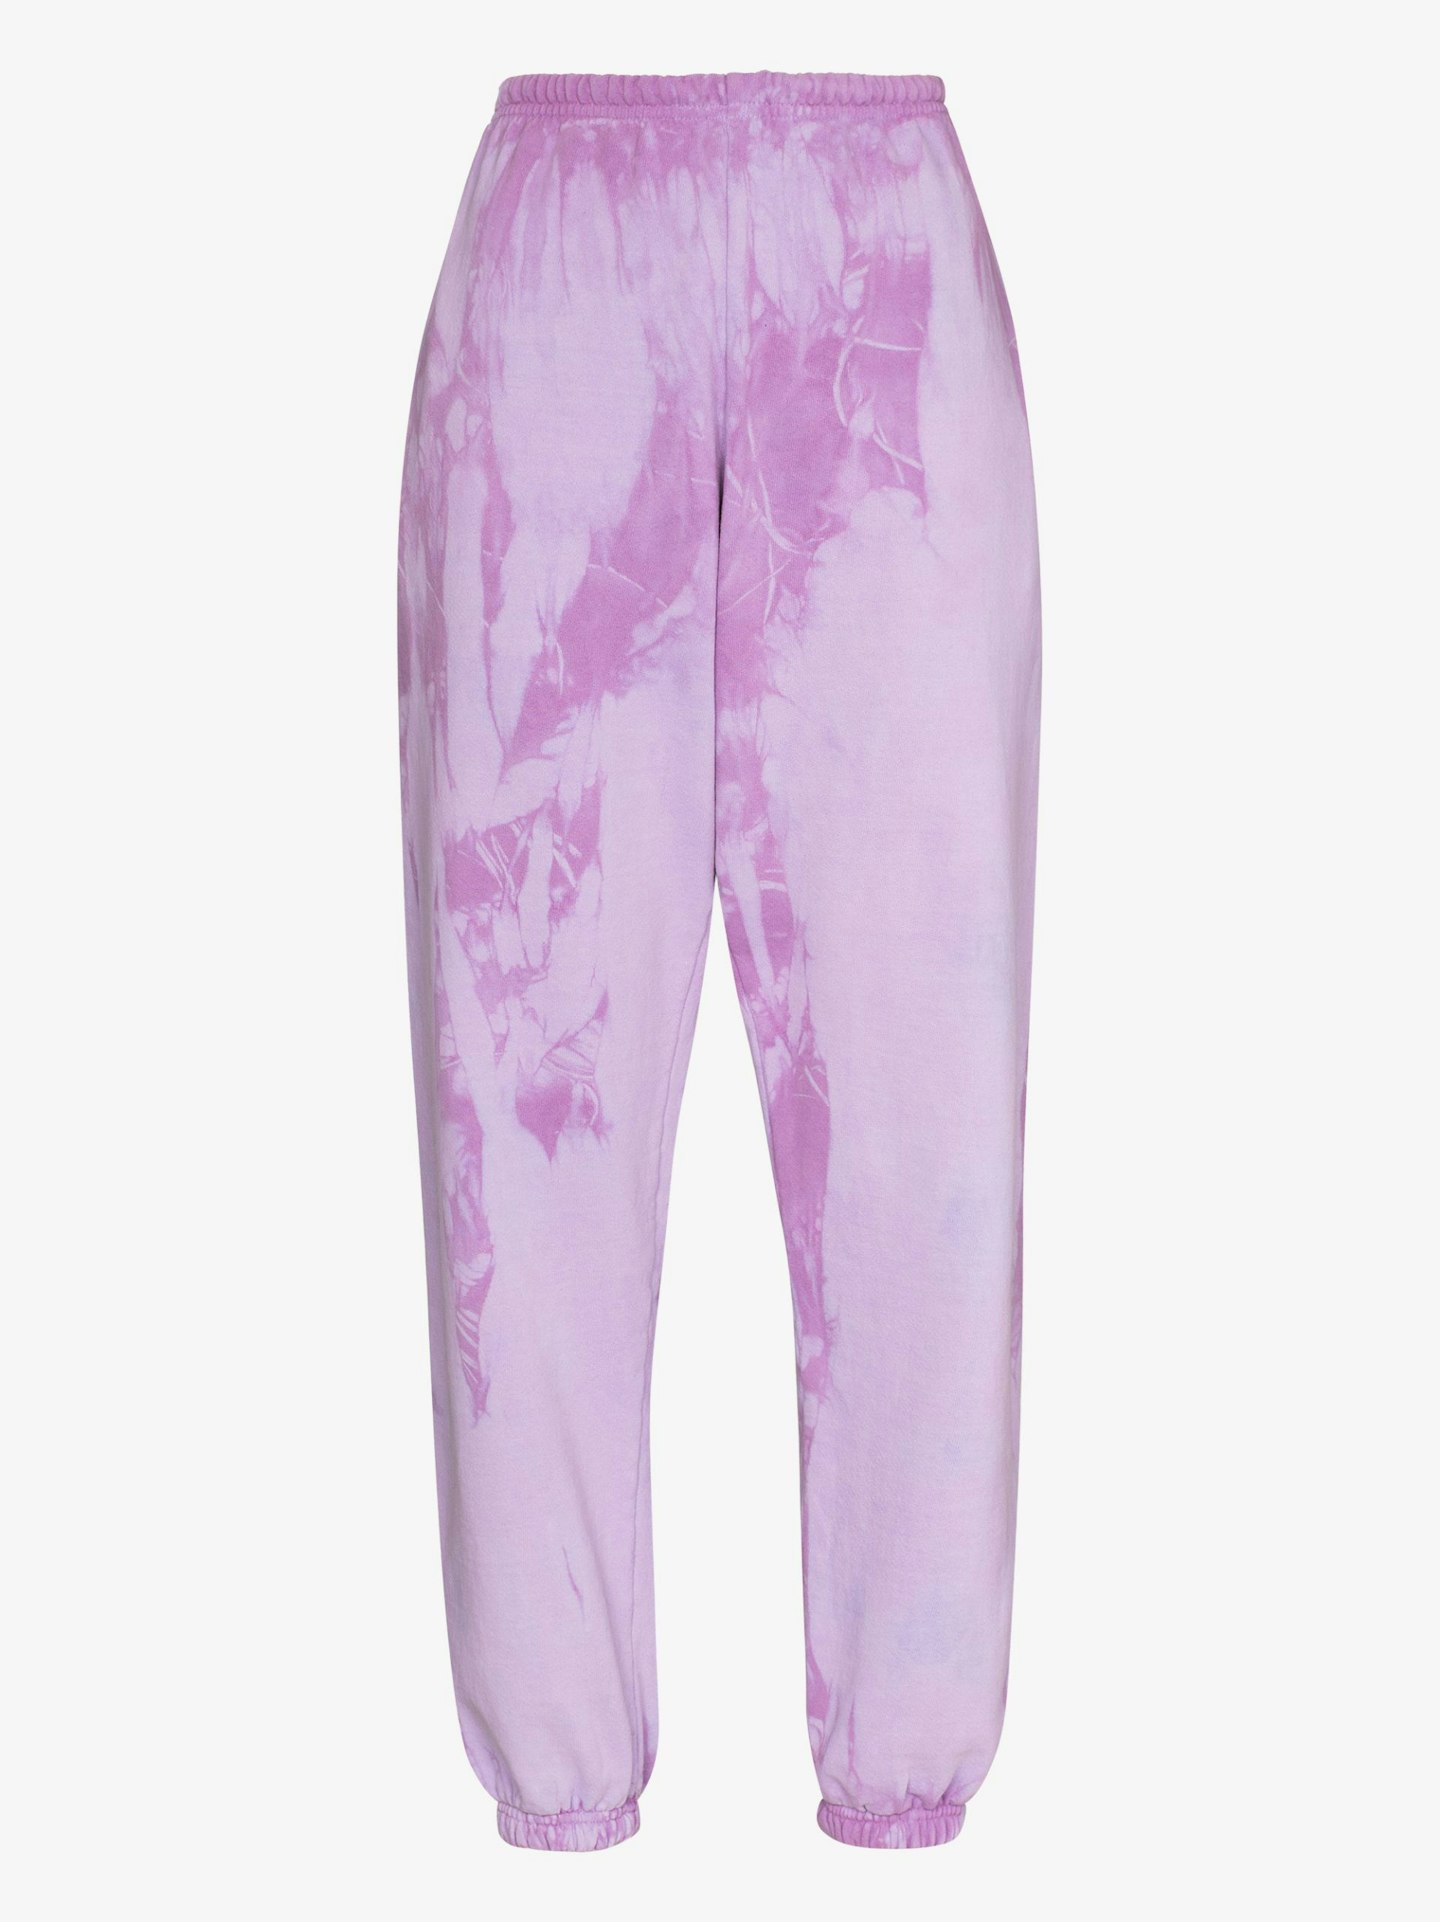 Come Back As A Flower, Tie-Dye Recycled Cotton Track Pants, £225